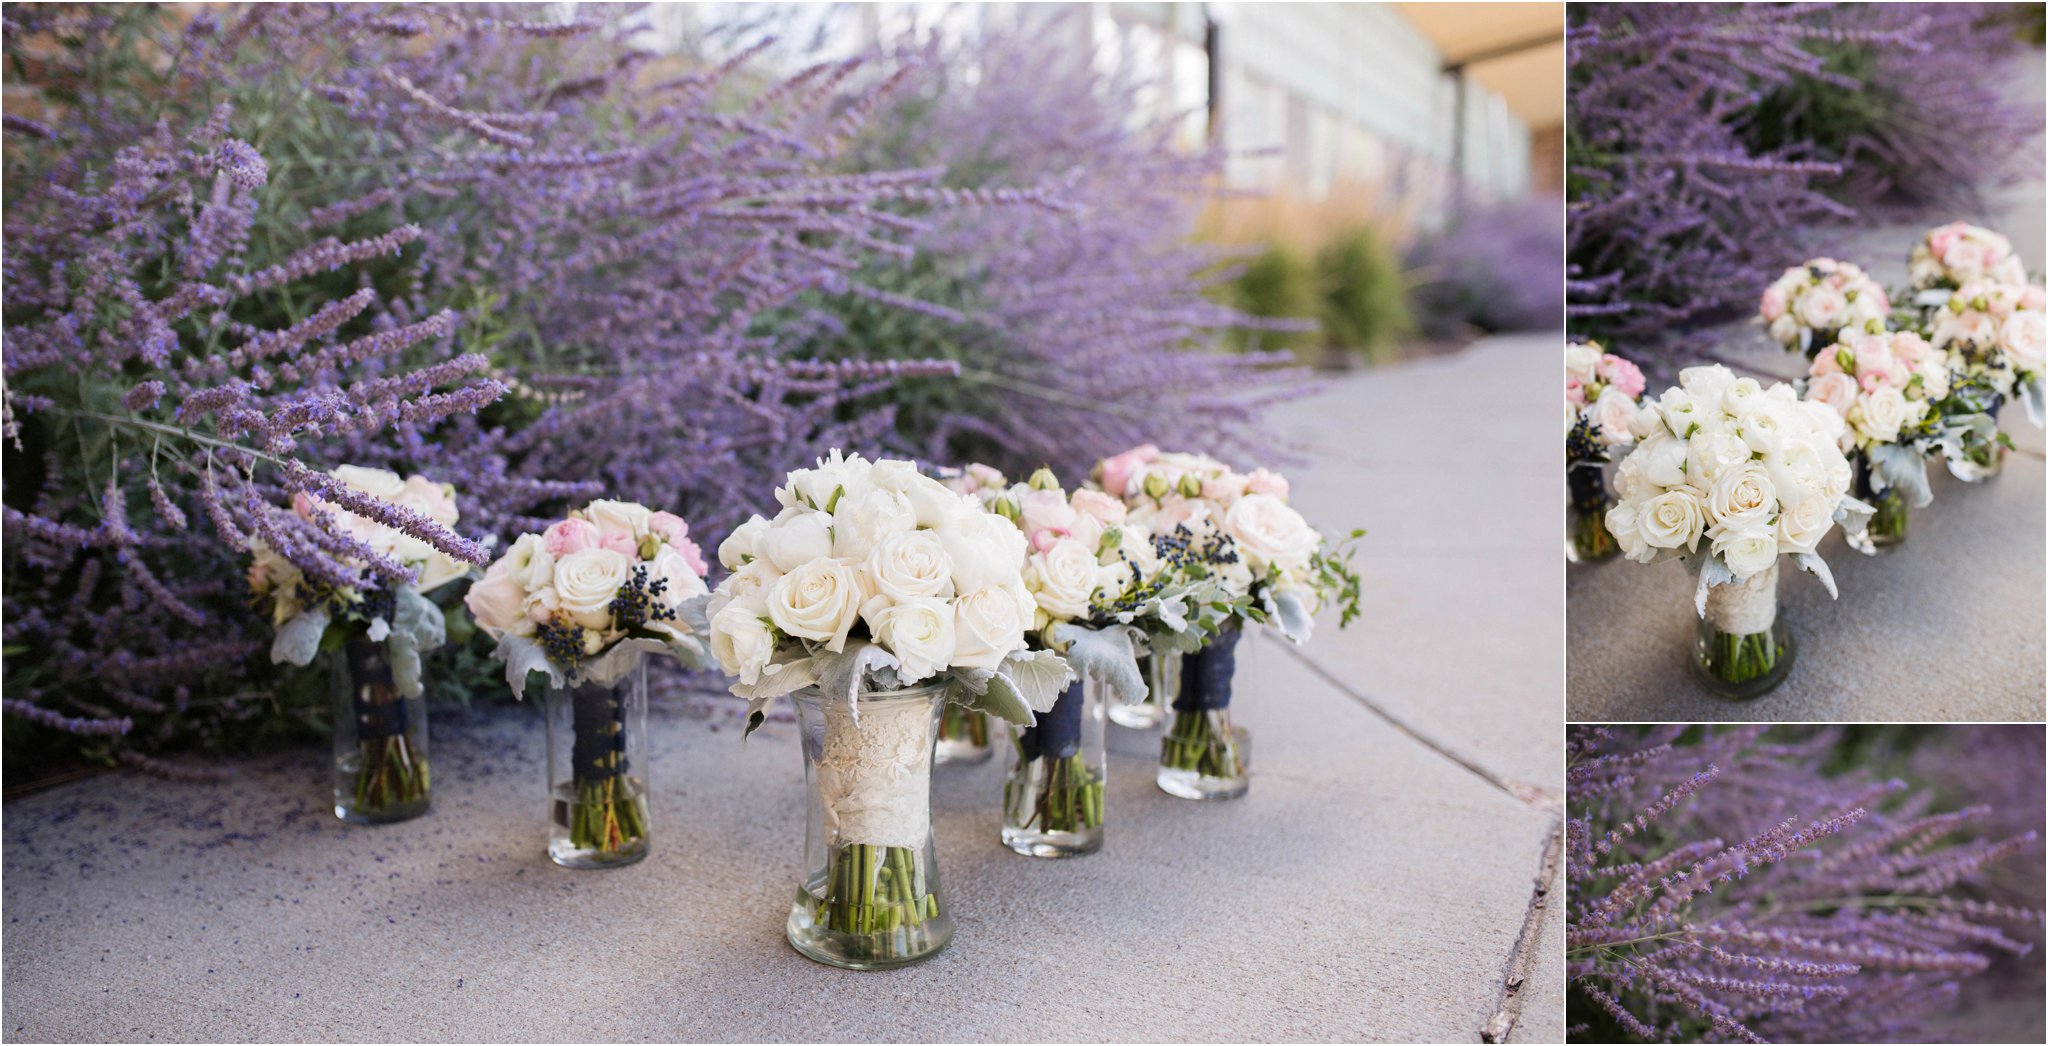 Sioux Falls Wedding Photos | Destination Photographer | Felicia The Photographer | bouquets | white roses | dusty miller | berries | Peonies | Lavender